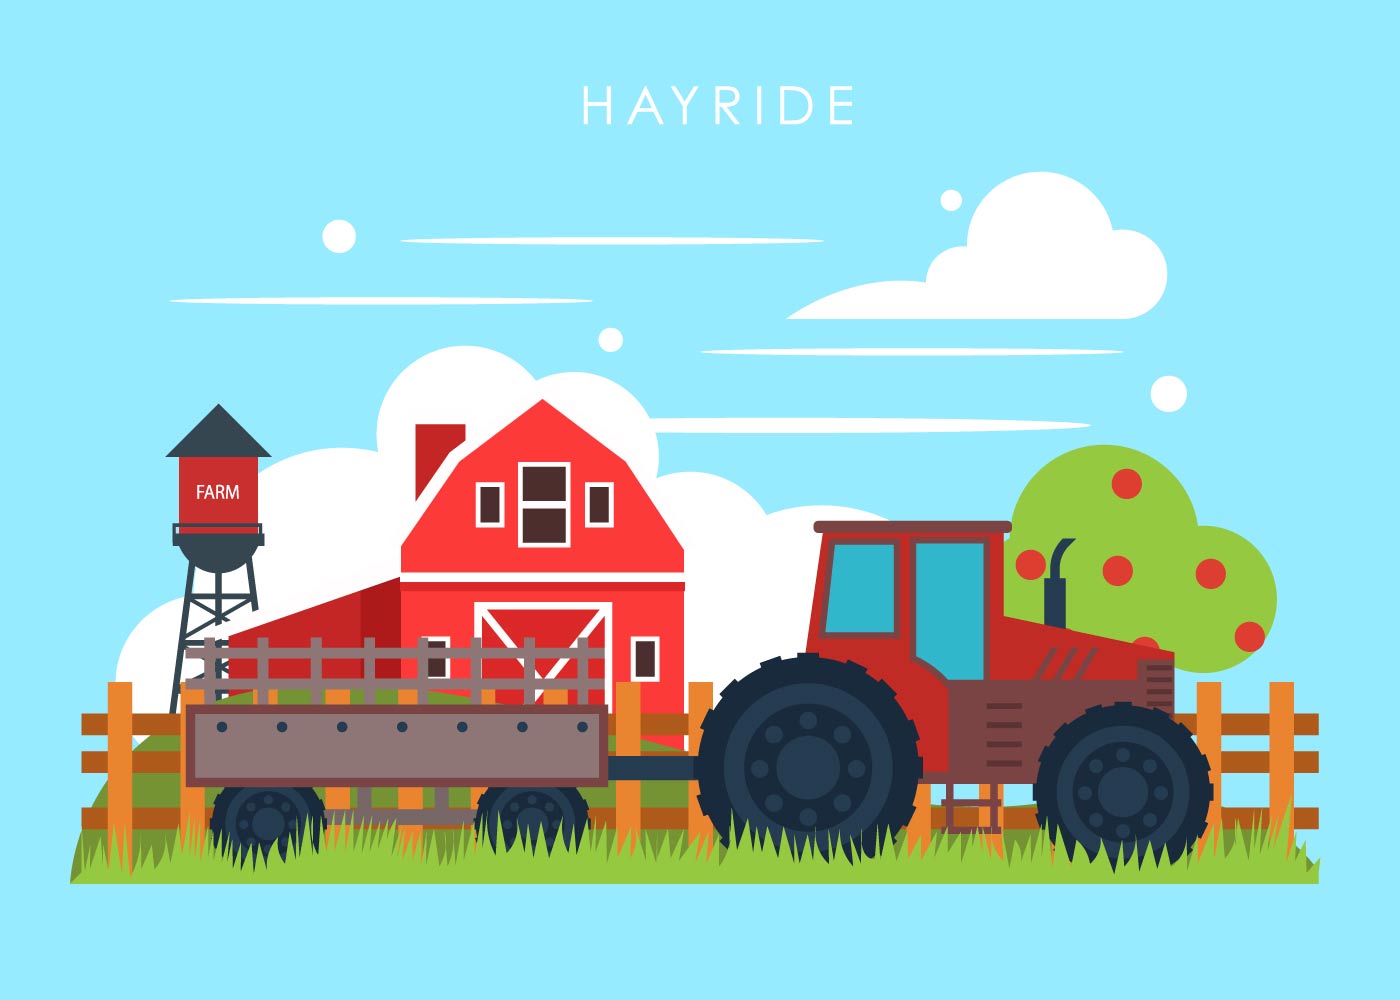 Download the Hayride on A Farm Vector 165213